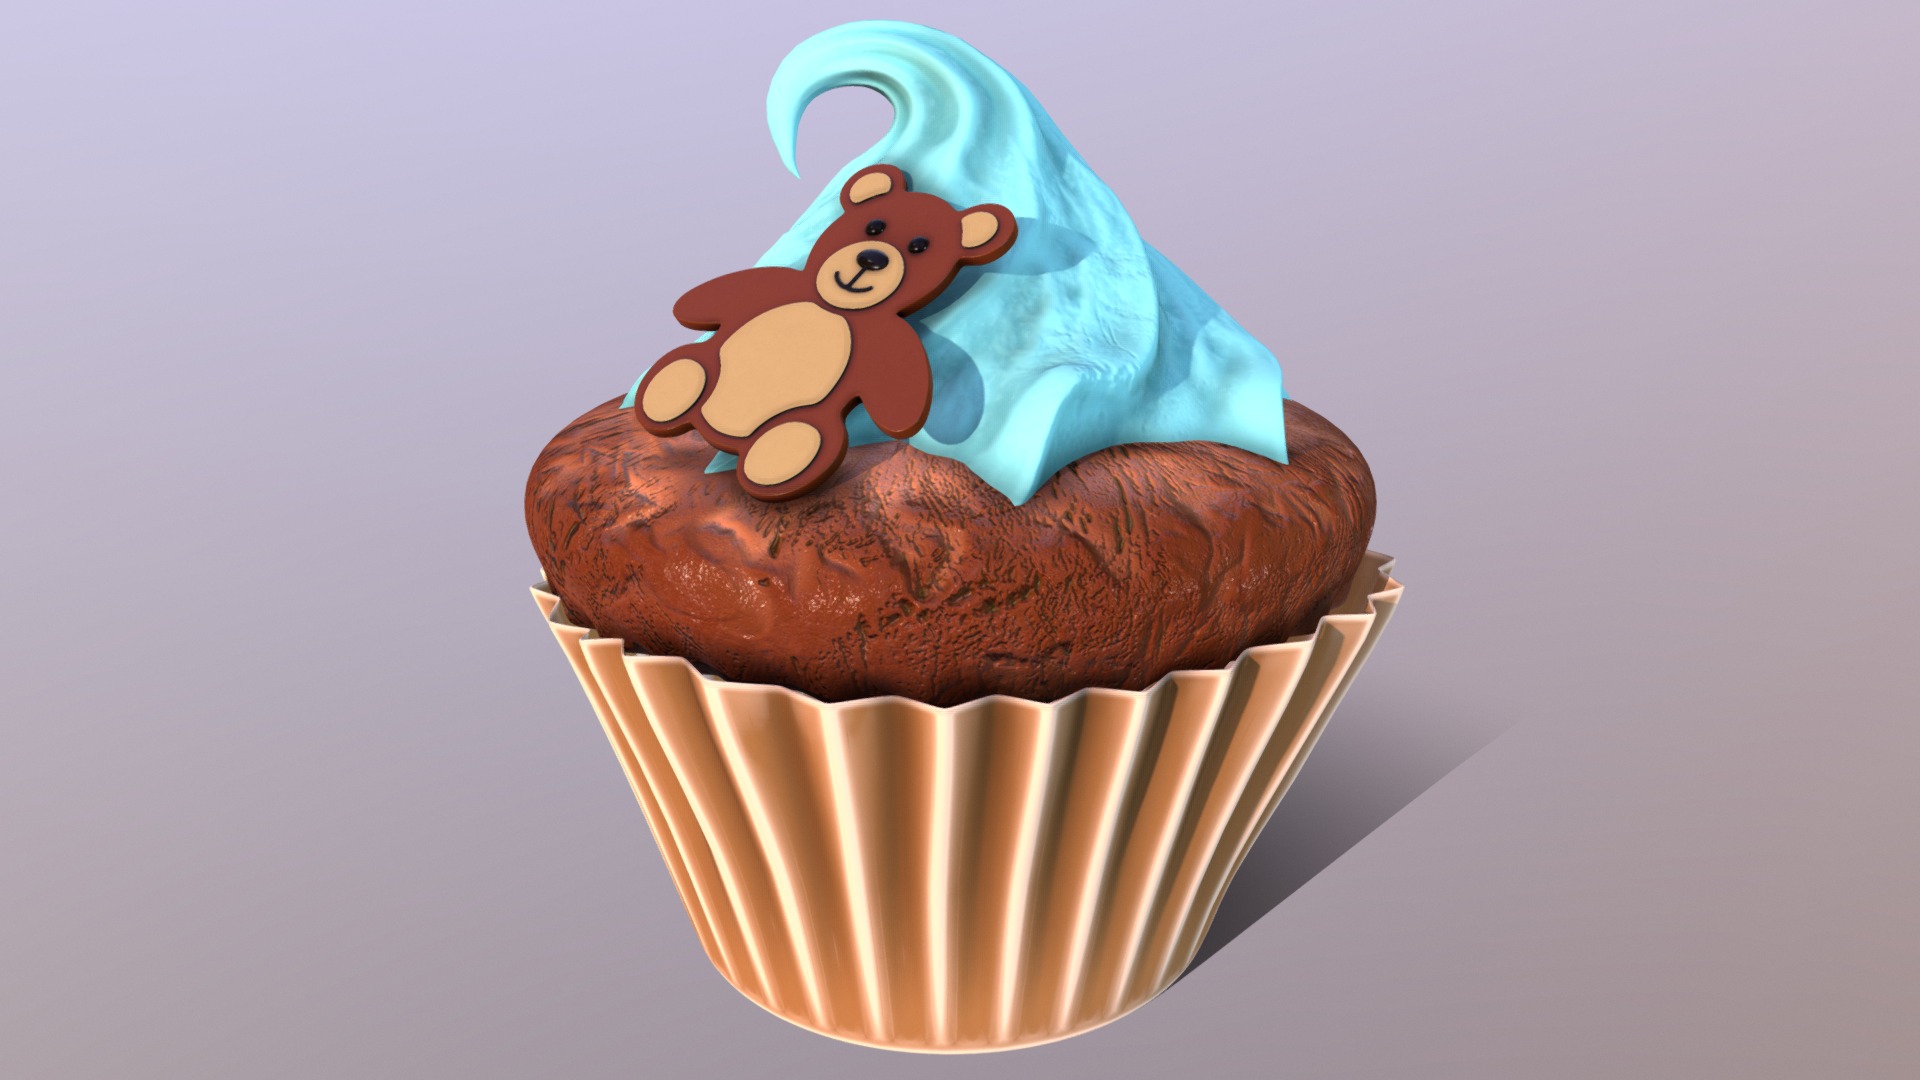 3D model Cute Teddy Bear Cup Cake - This is a 3D model of the Cute Teddy Bear Cup Cake. The 3D model is about a cake with a blue hat and a stuffed animal on top.